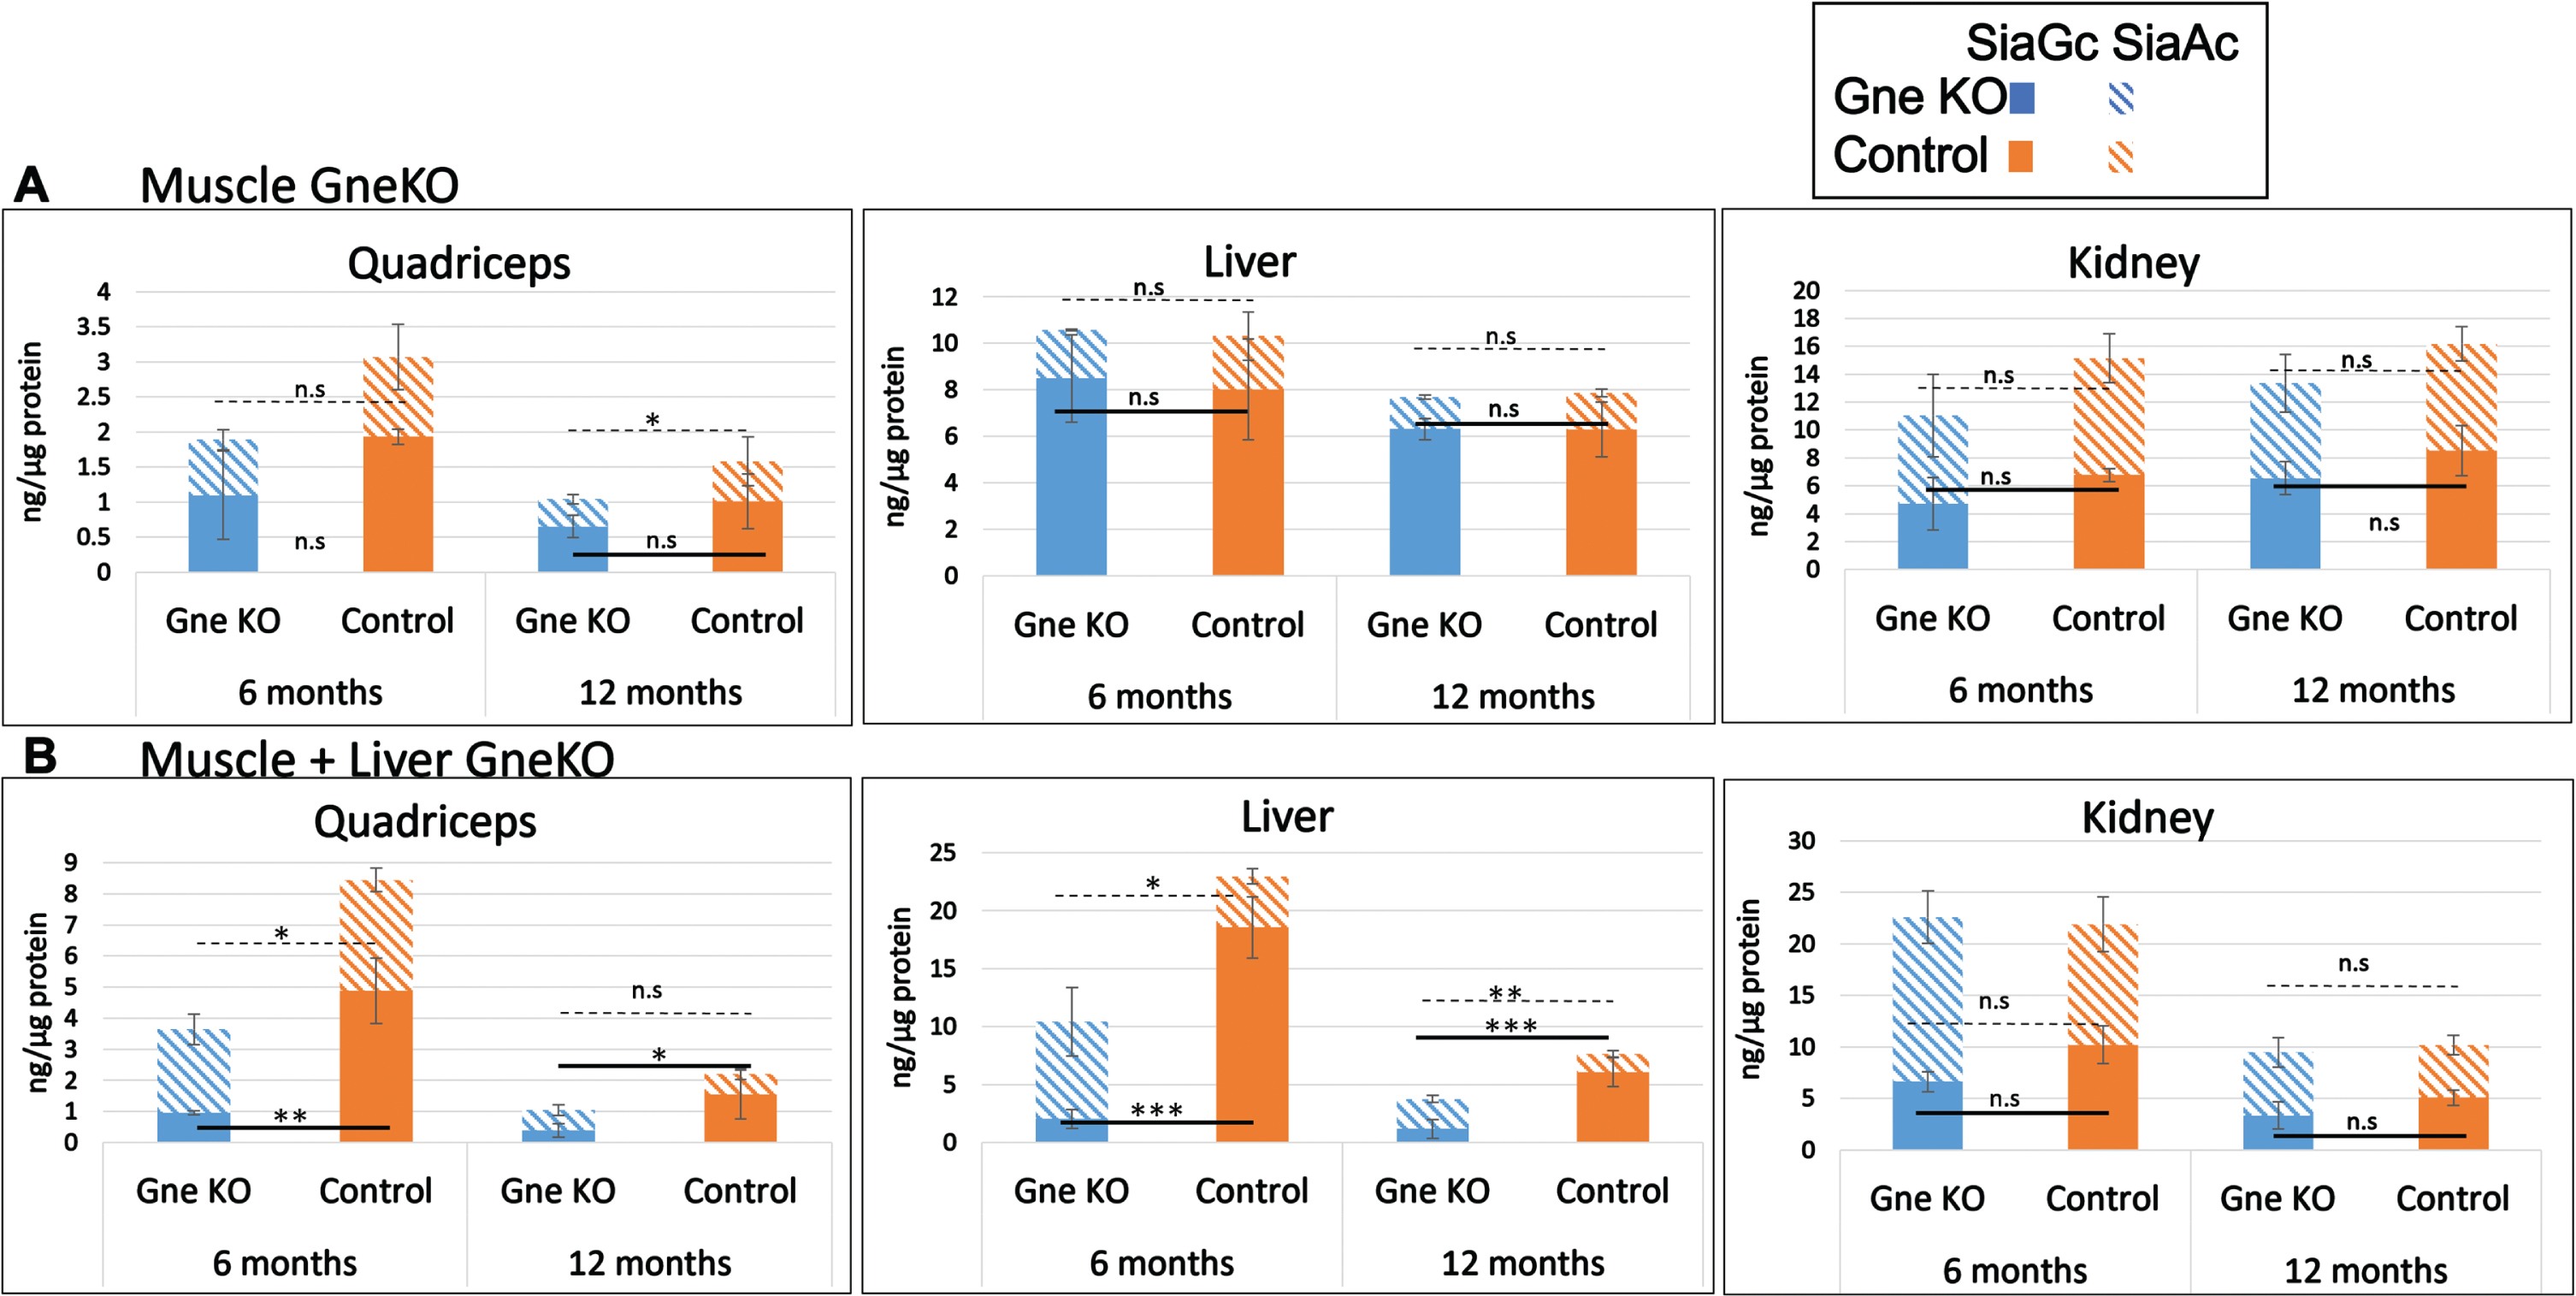 Sialic acid content in various tissues of Gne KO mice. SiaGc and SiaAc content were quantitated in quadriceps, liver and kidney of muscle Gne KO (A) and muscle+liver Gne double KO (B) mice at 6 and 12 months after Gne KO was effective. n.s, not significant; *p < 0.05; **p < 0.01; ***p < 0.005.